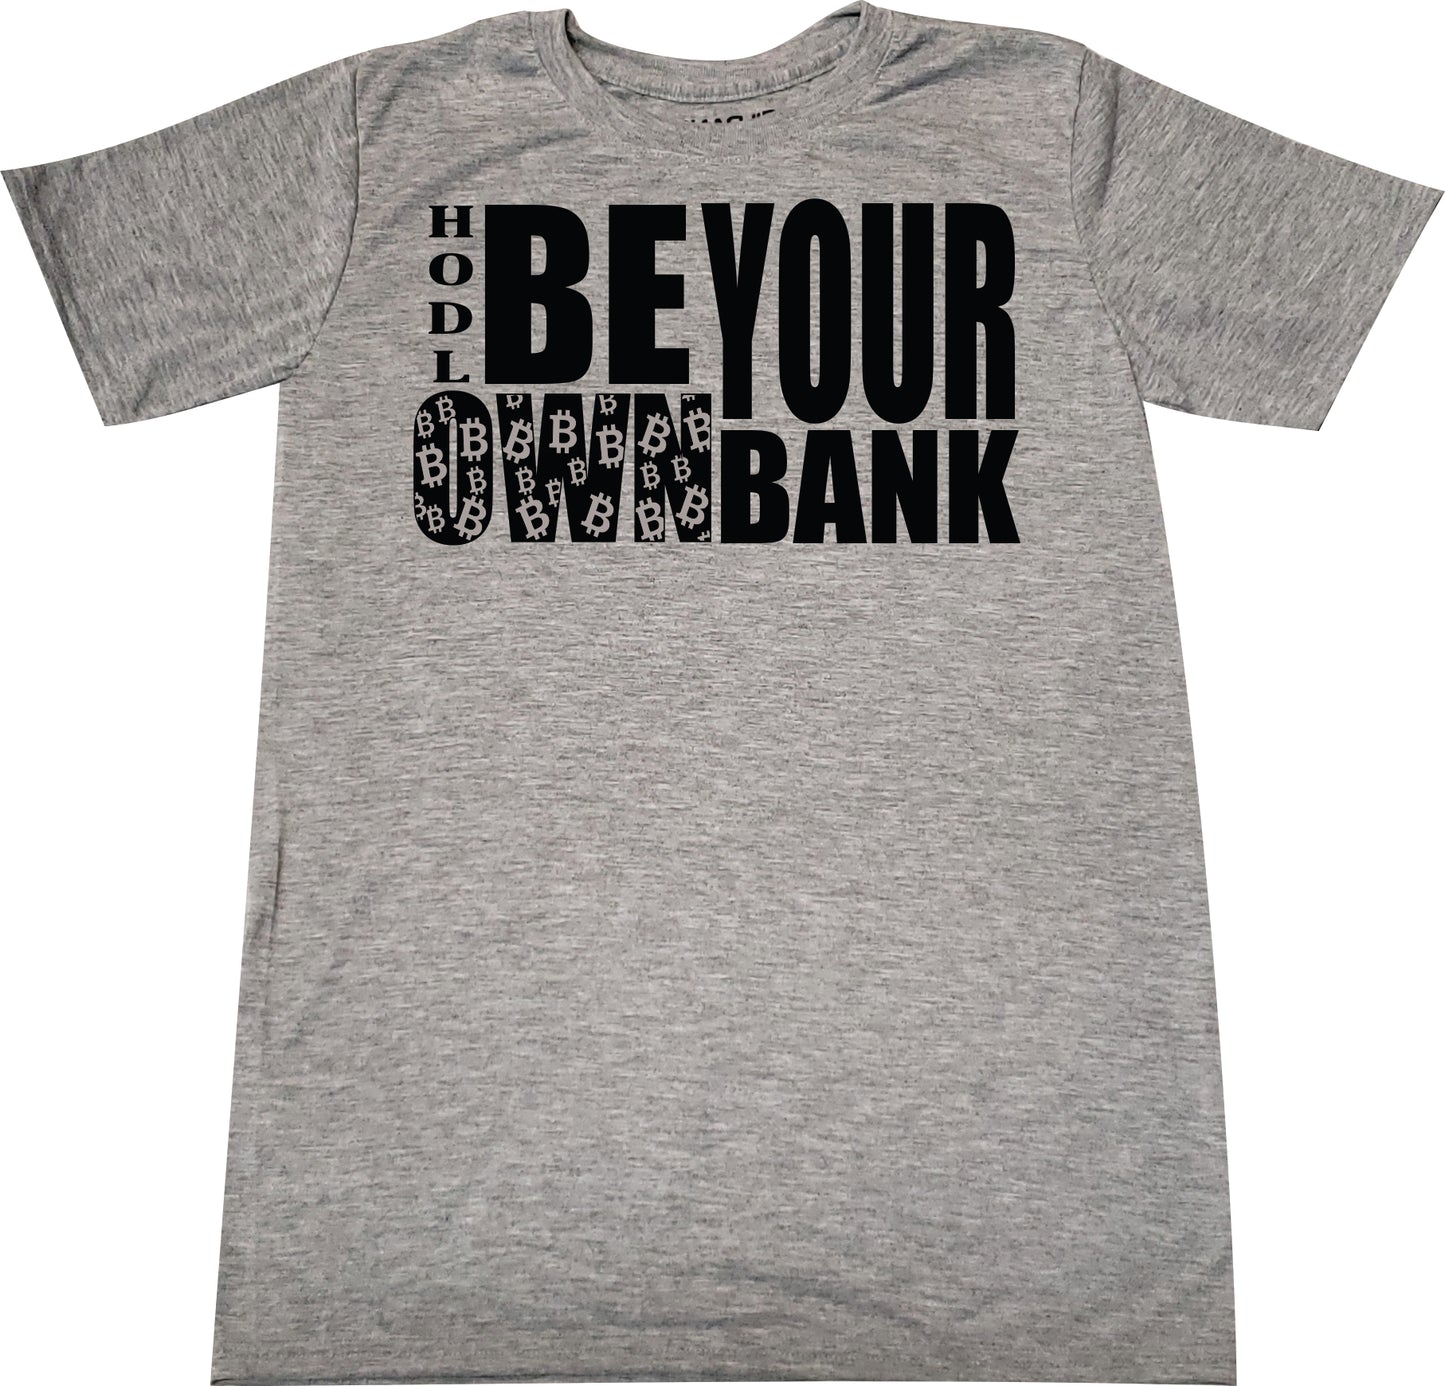 Be your own Bank Bitcoin t-shirt